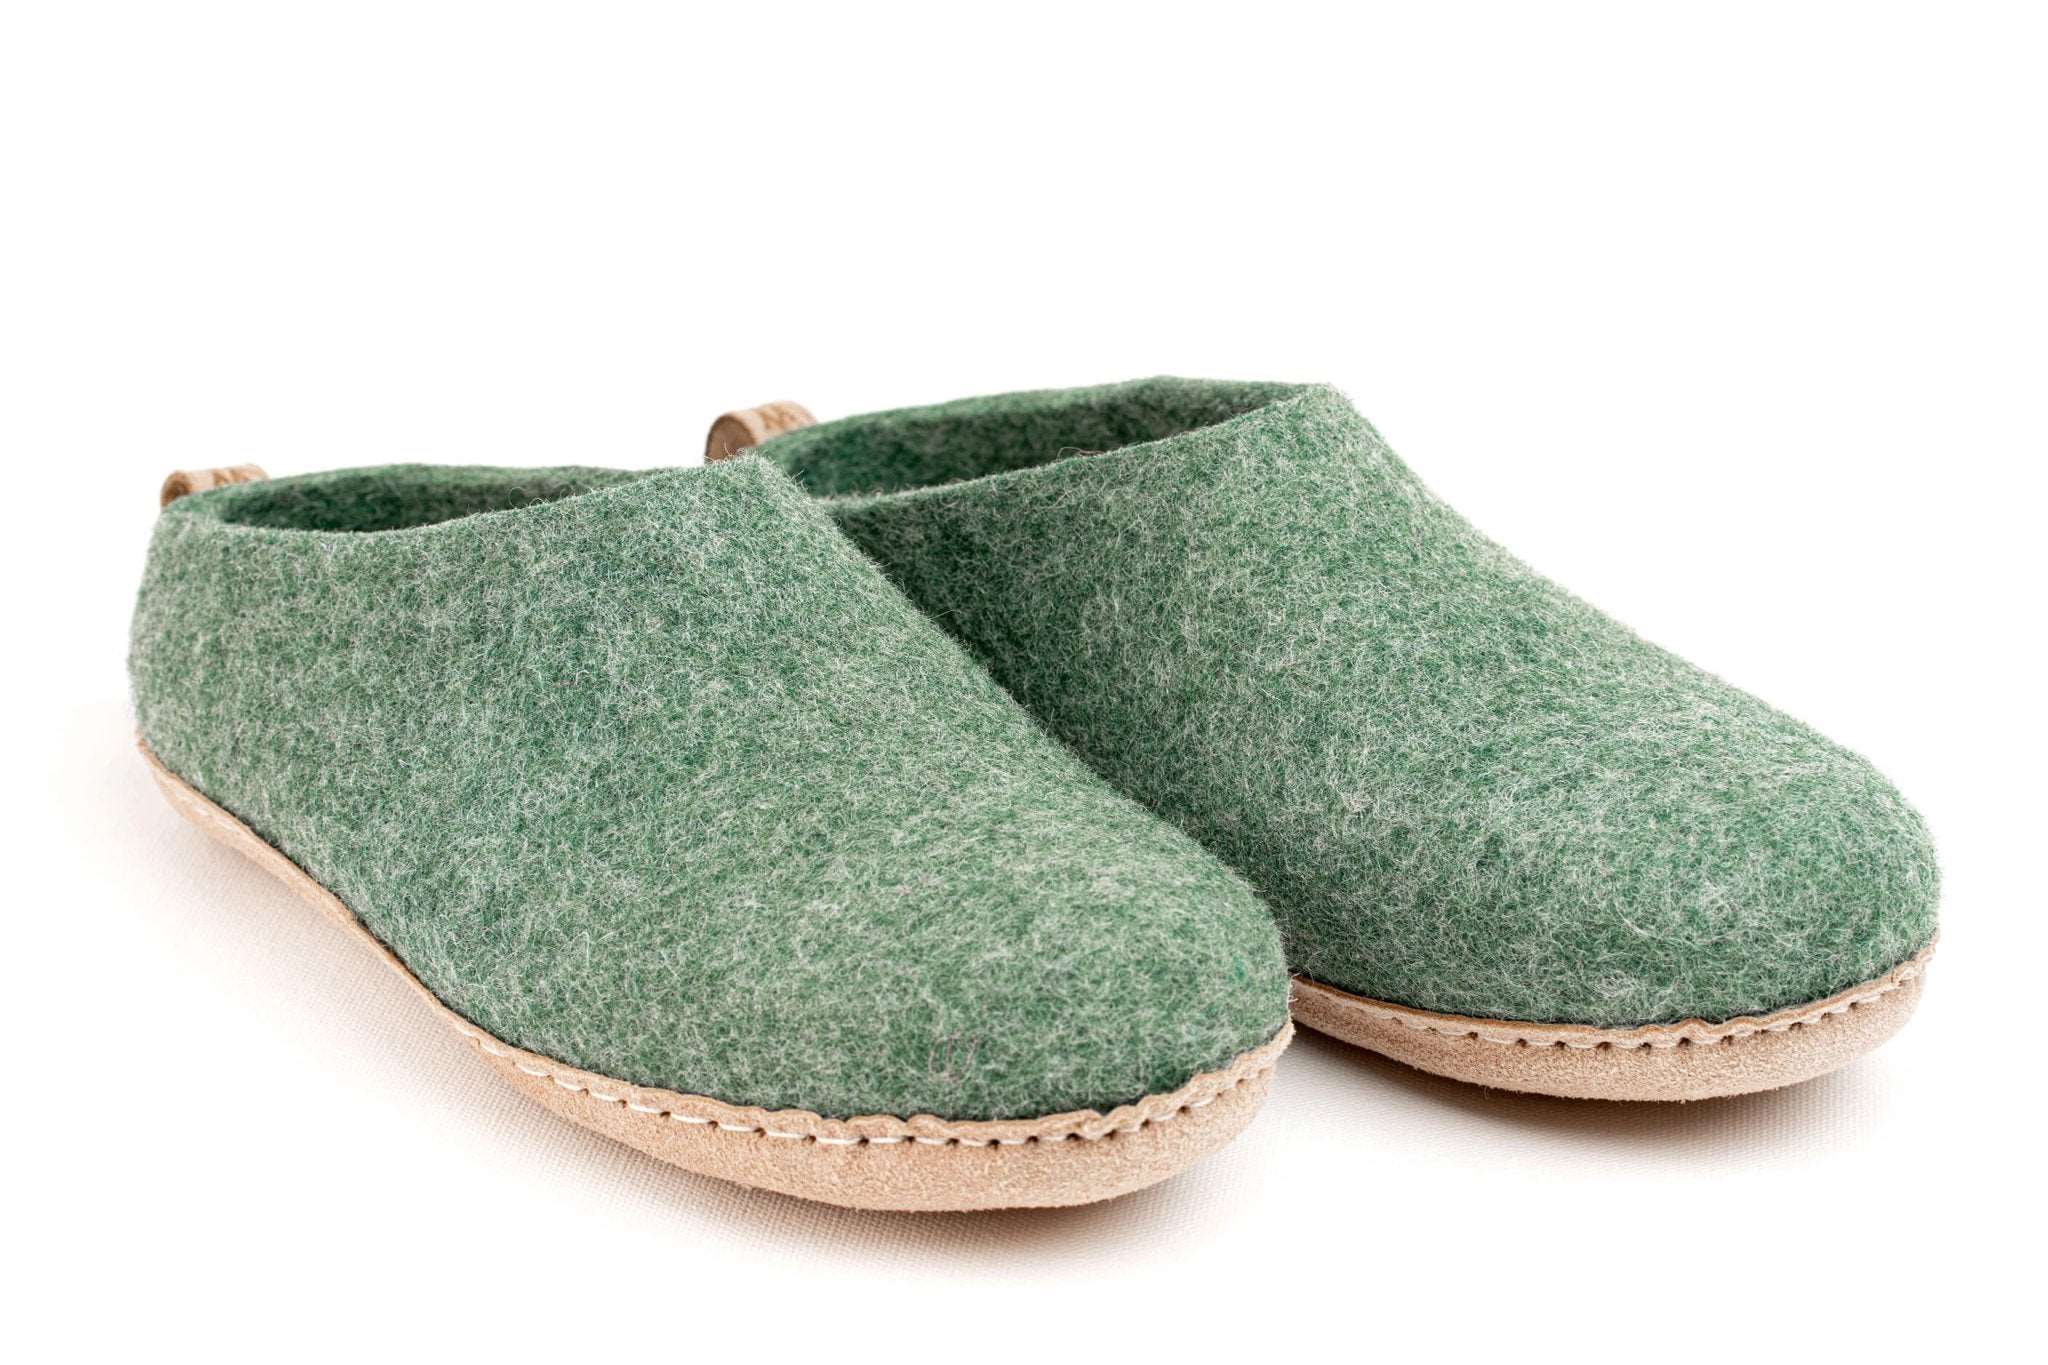 Indoor Open Heel Slippers With Leather Sole - Jungle Green - Woollyes